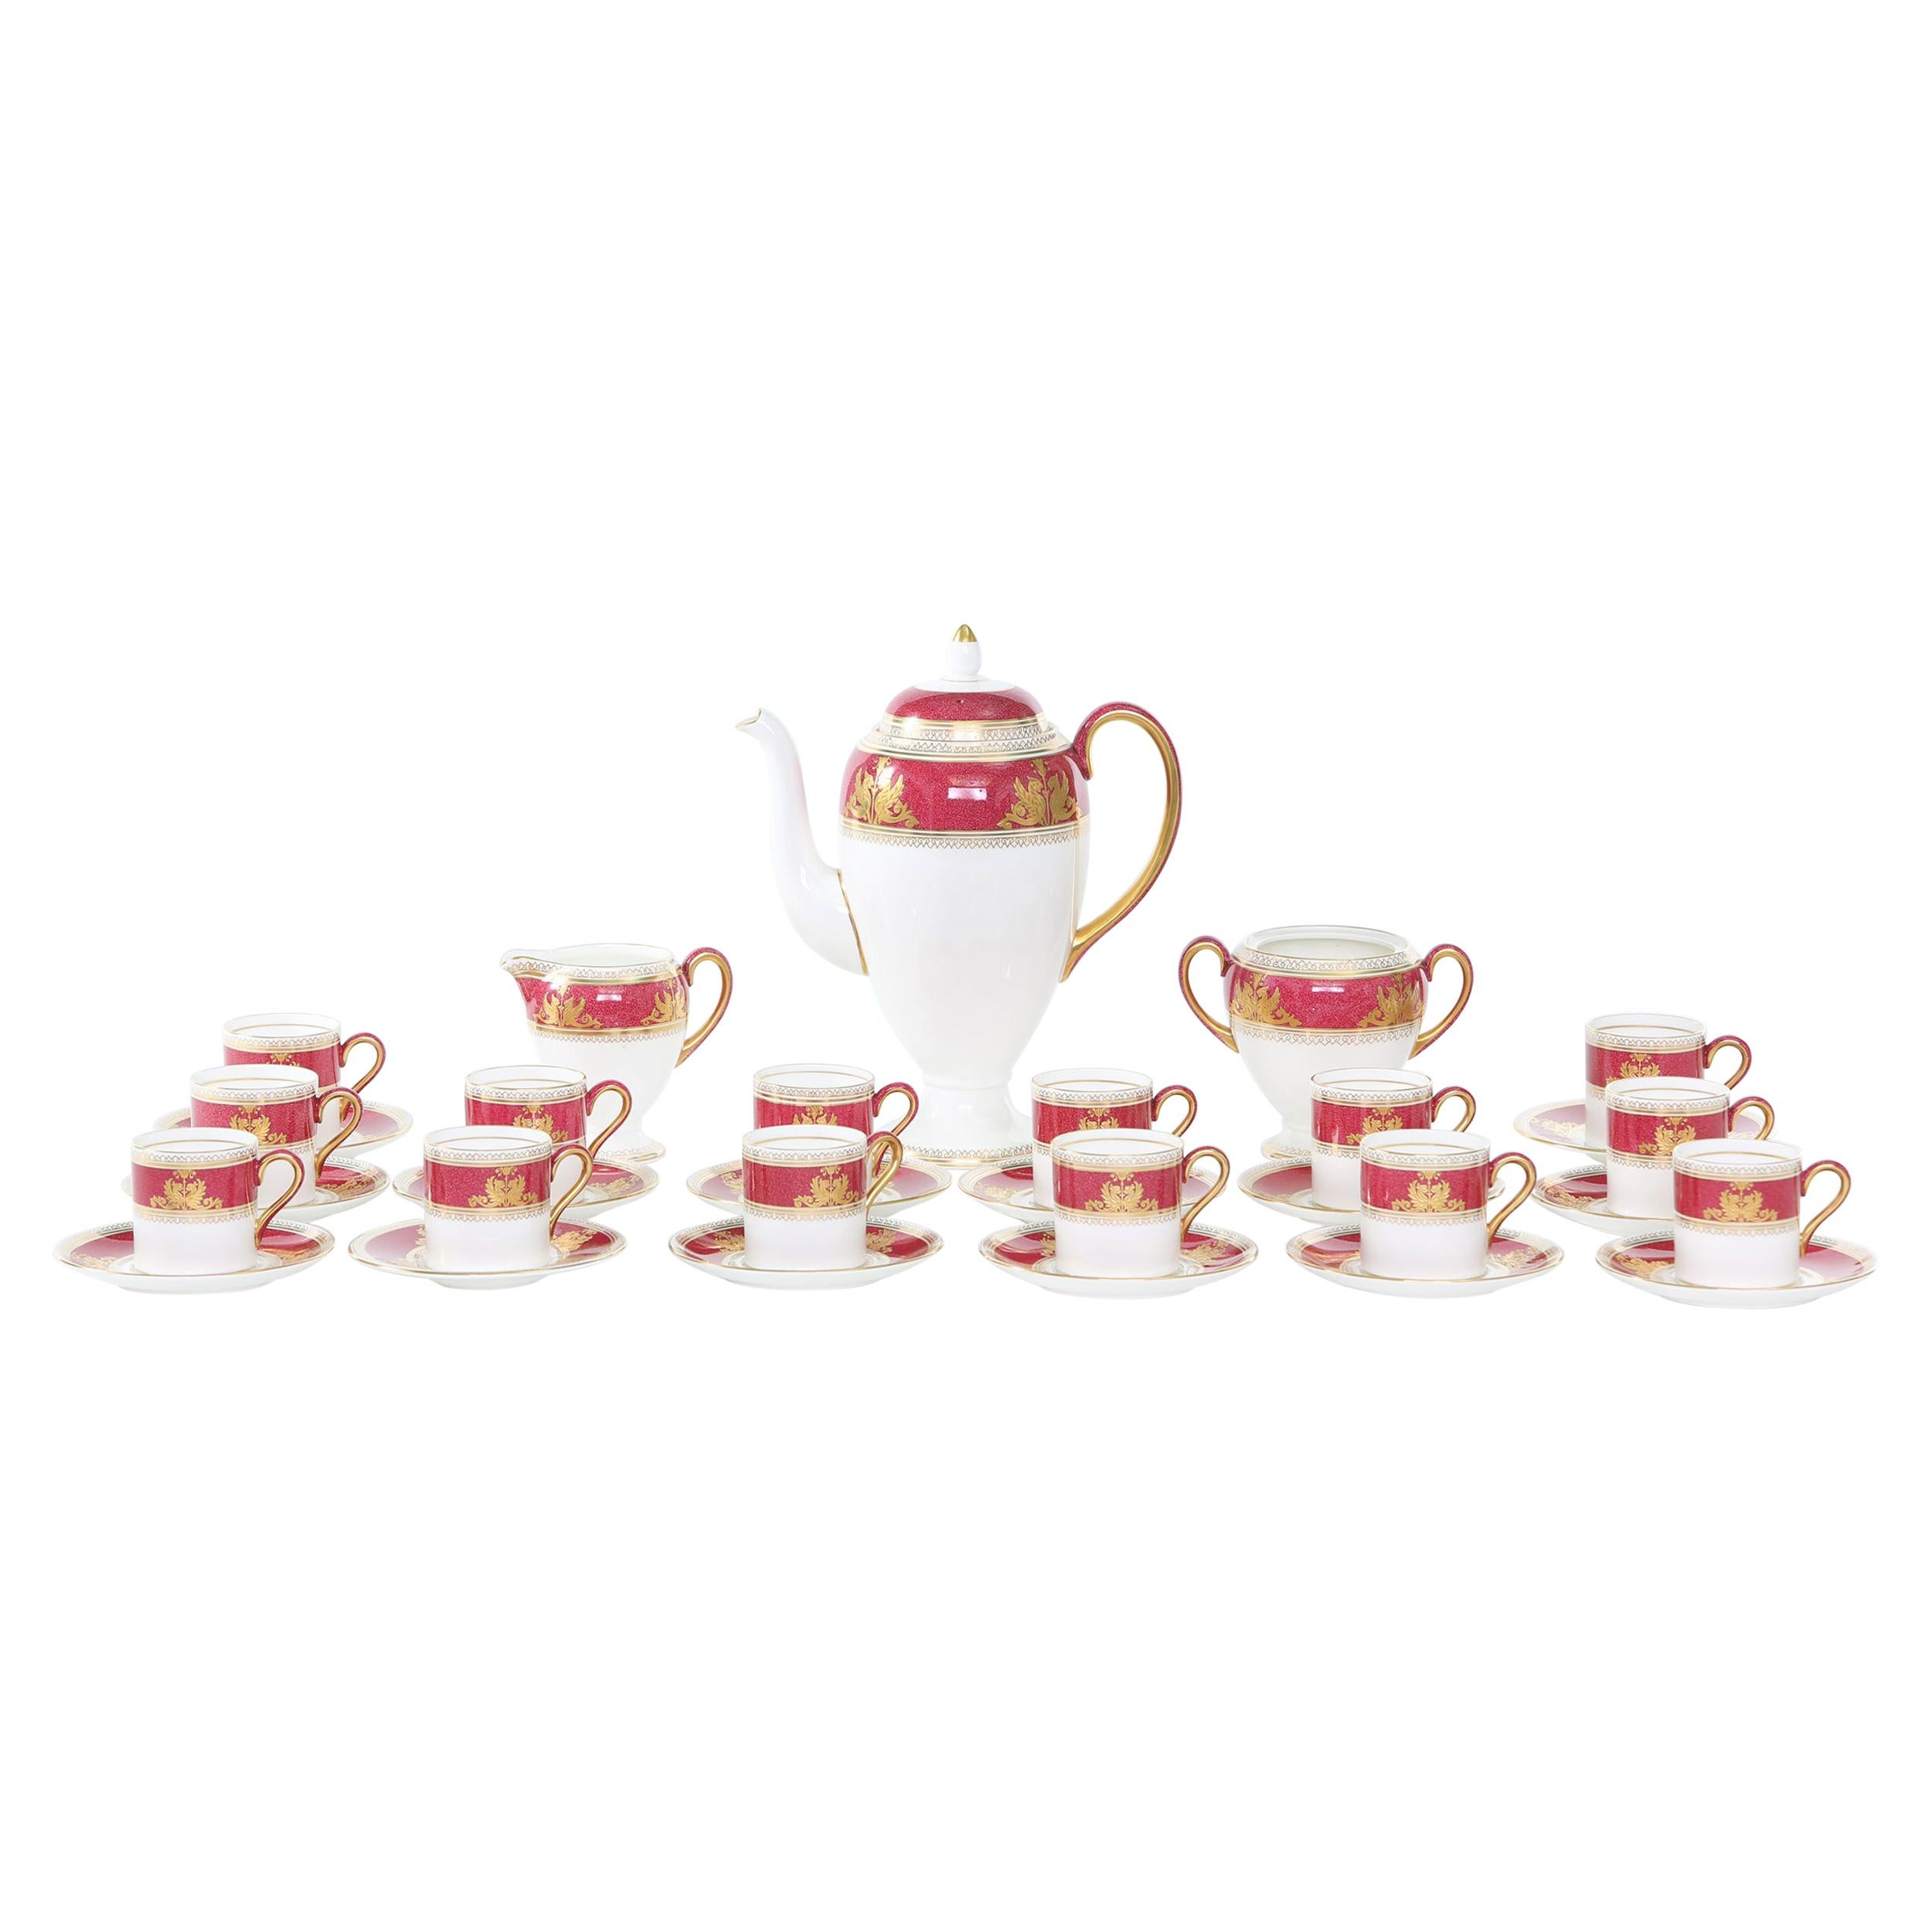 Wedgwood Porcelain Coffee Service for 14 People For Sale